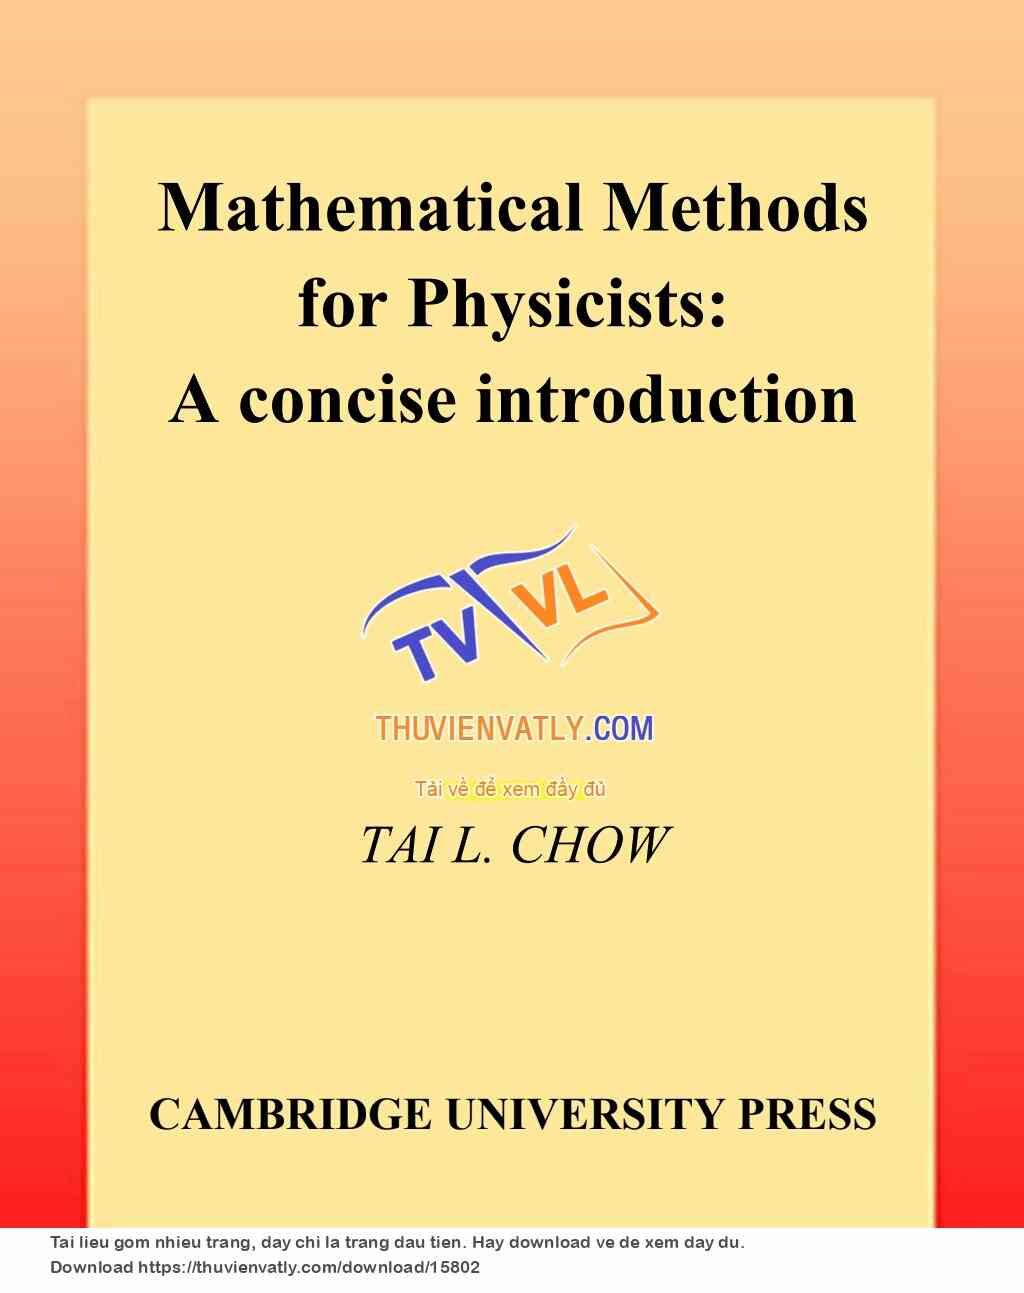 Mathematical methods for physicists - Tal Chow (CUP 2000)